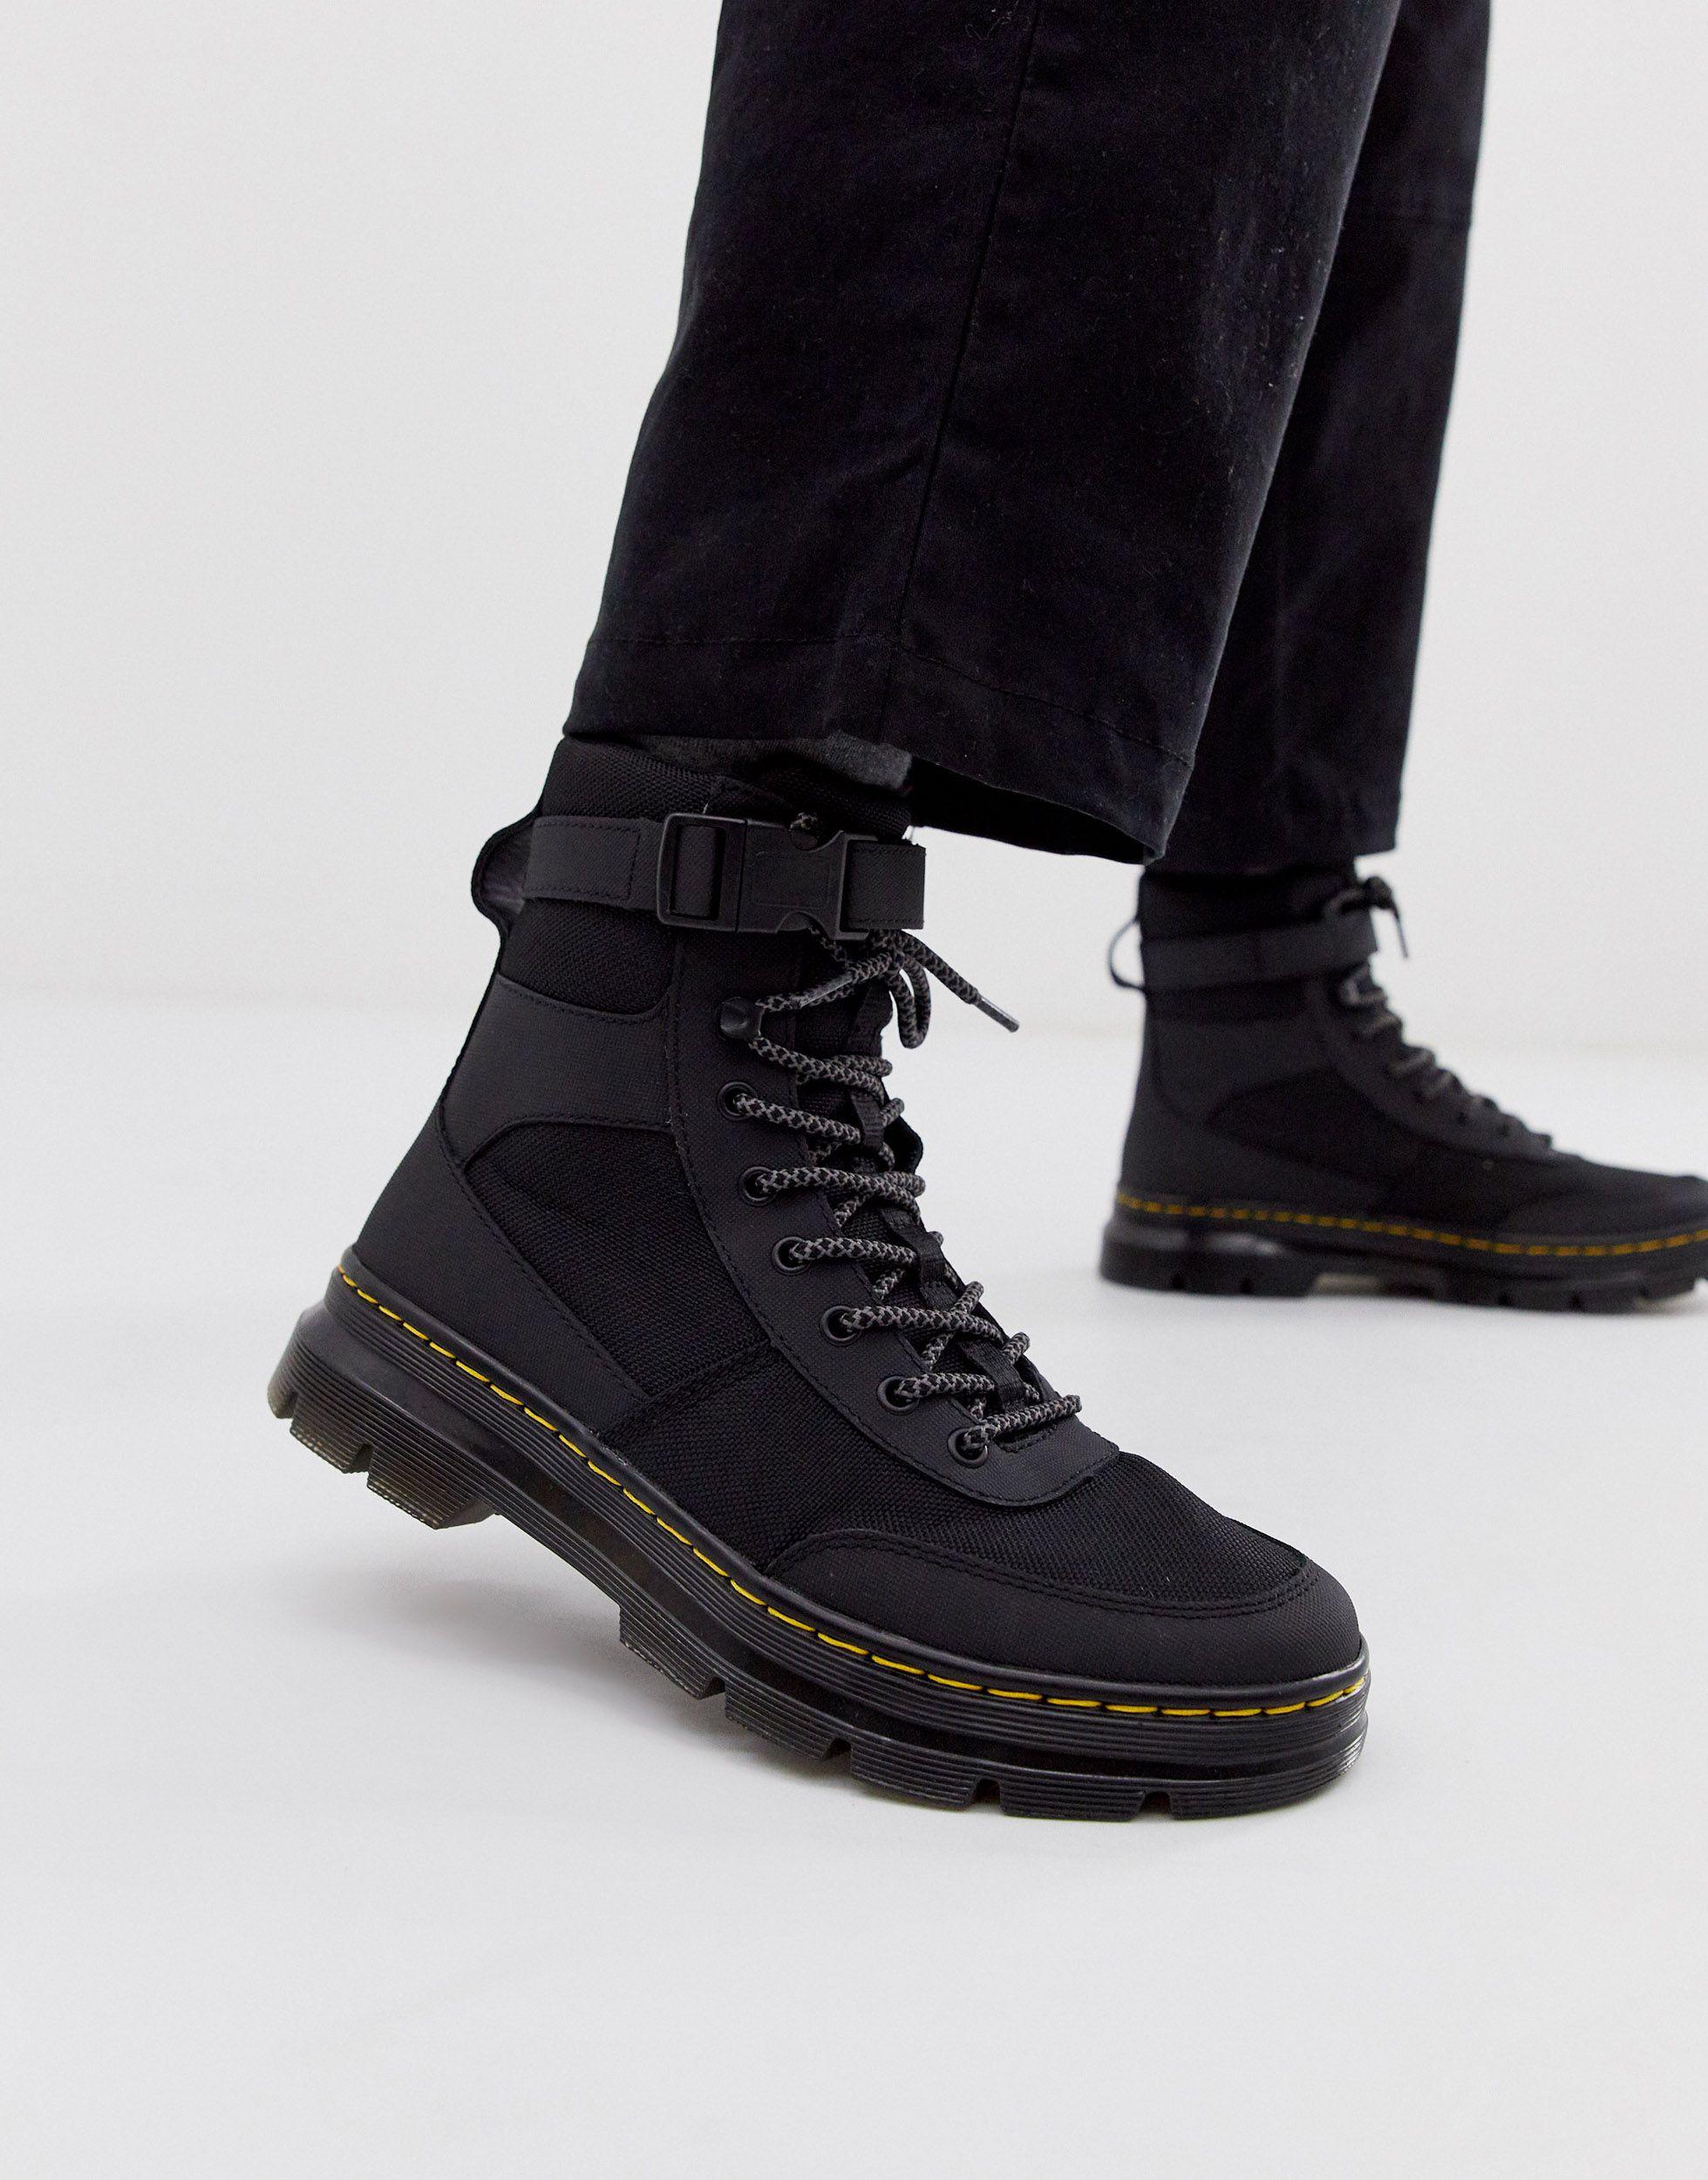 Dr. Martens Combs Tech Boot in Black for Men - Lyst